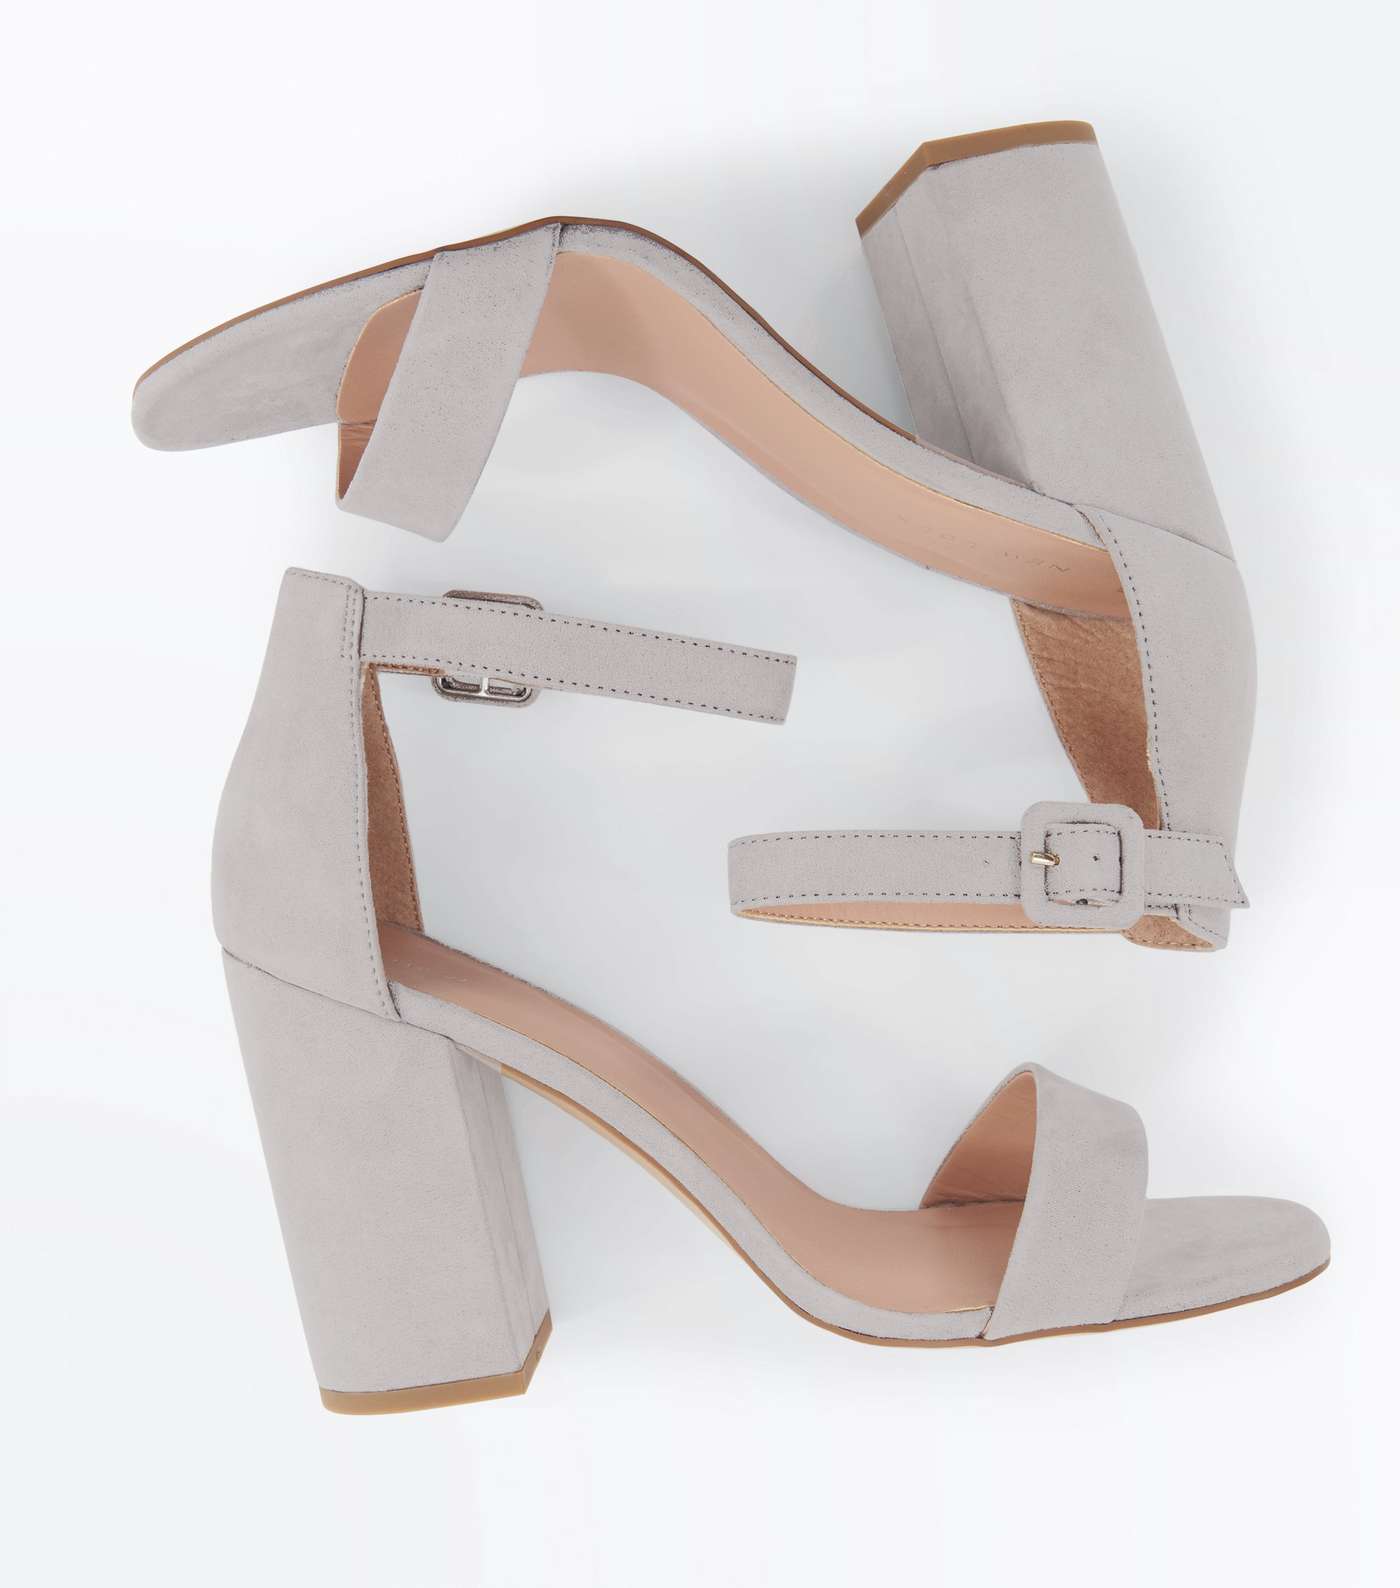 Grey Suedette Barely There Block Heels Image 4